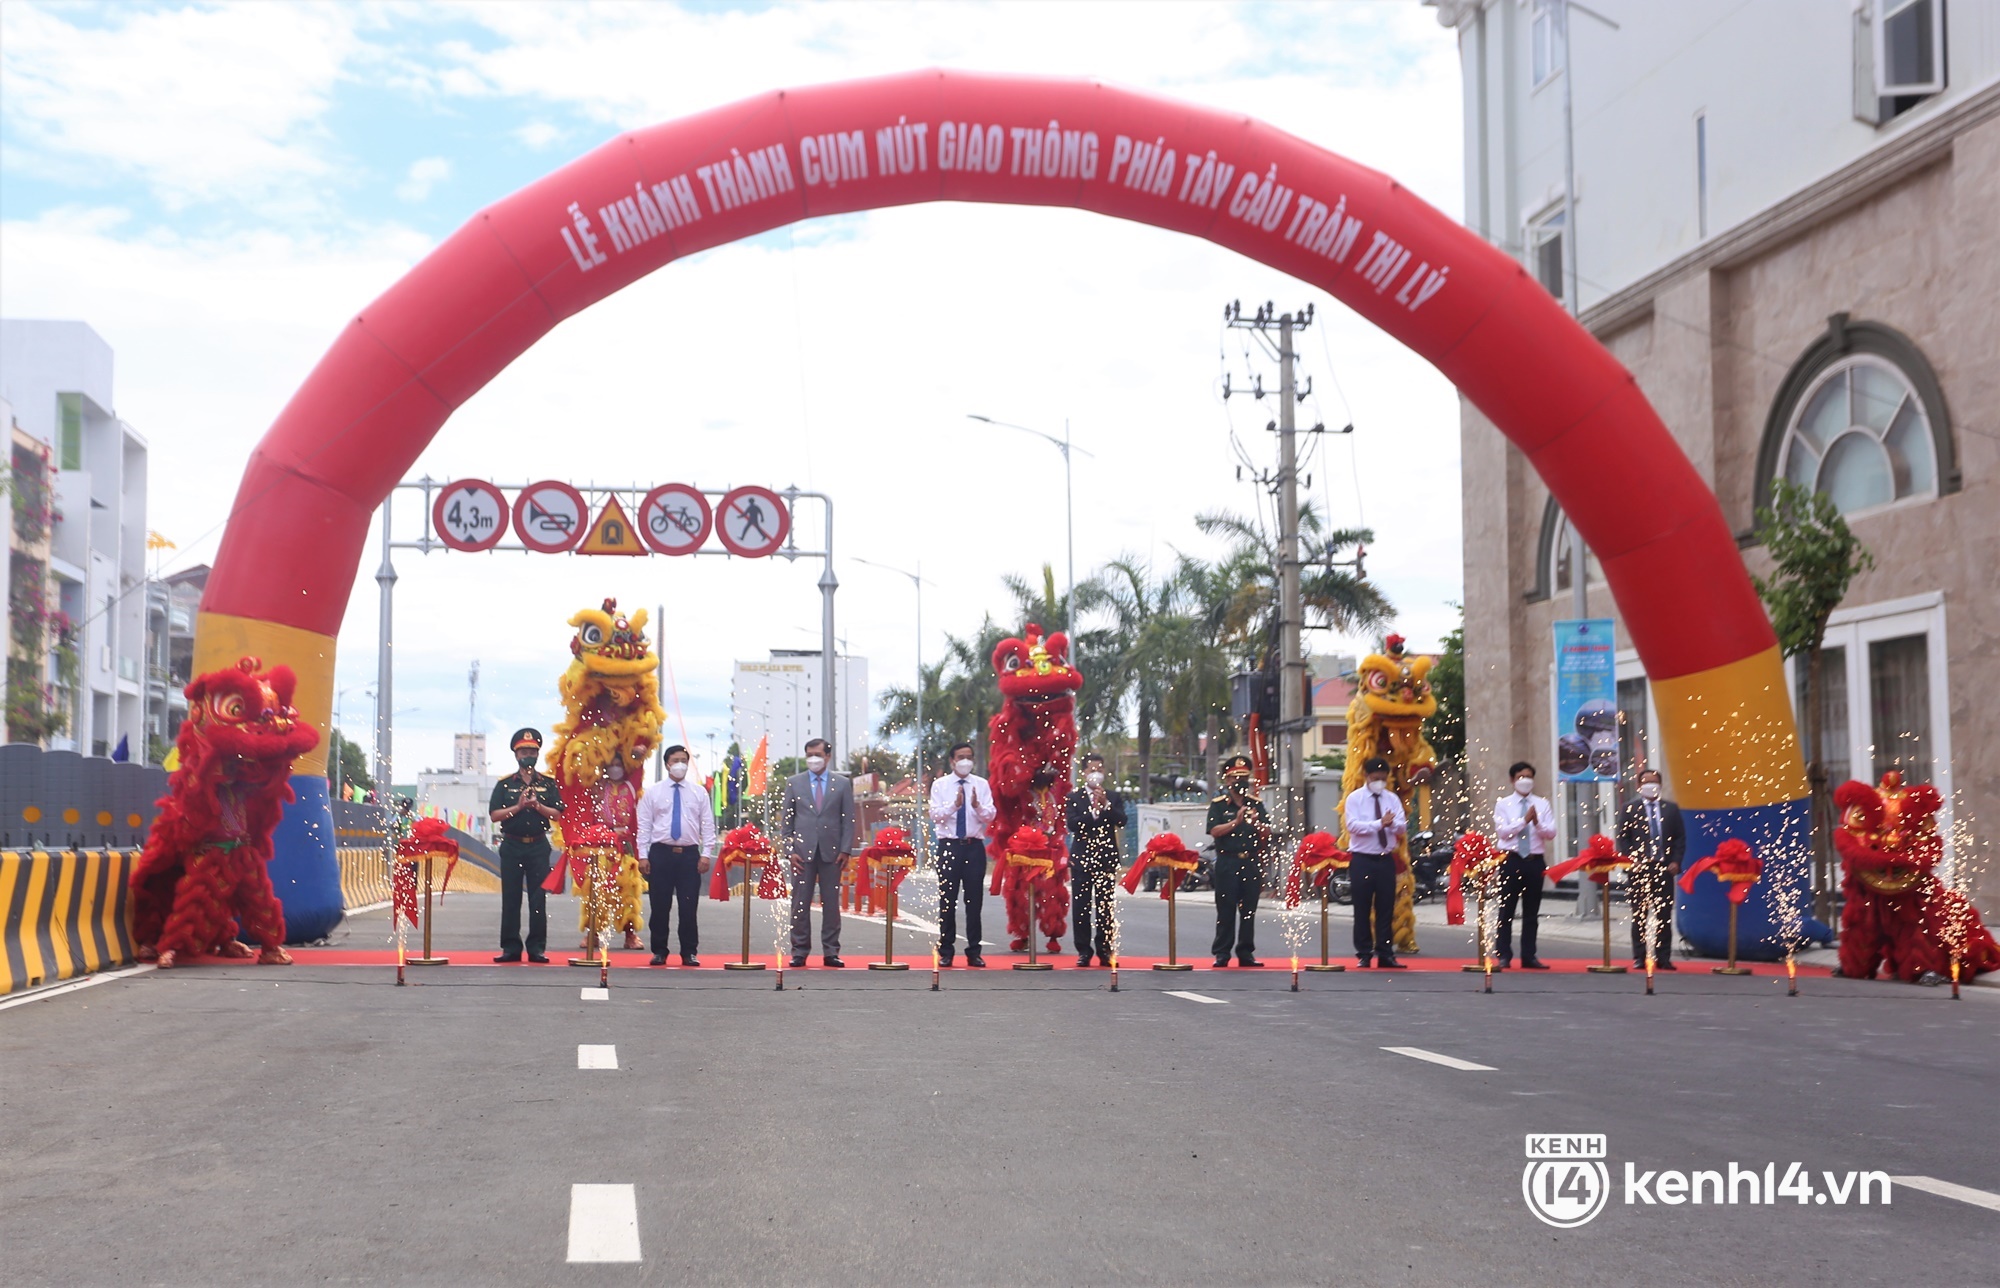 Da Nang inaugurated a 3-storey intersection with more than 720 billion VND with a very unique open-air tunnel - Photo 1.